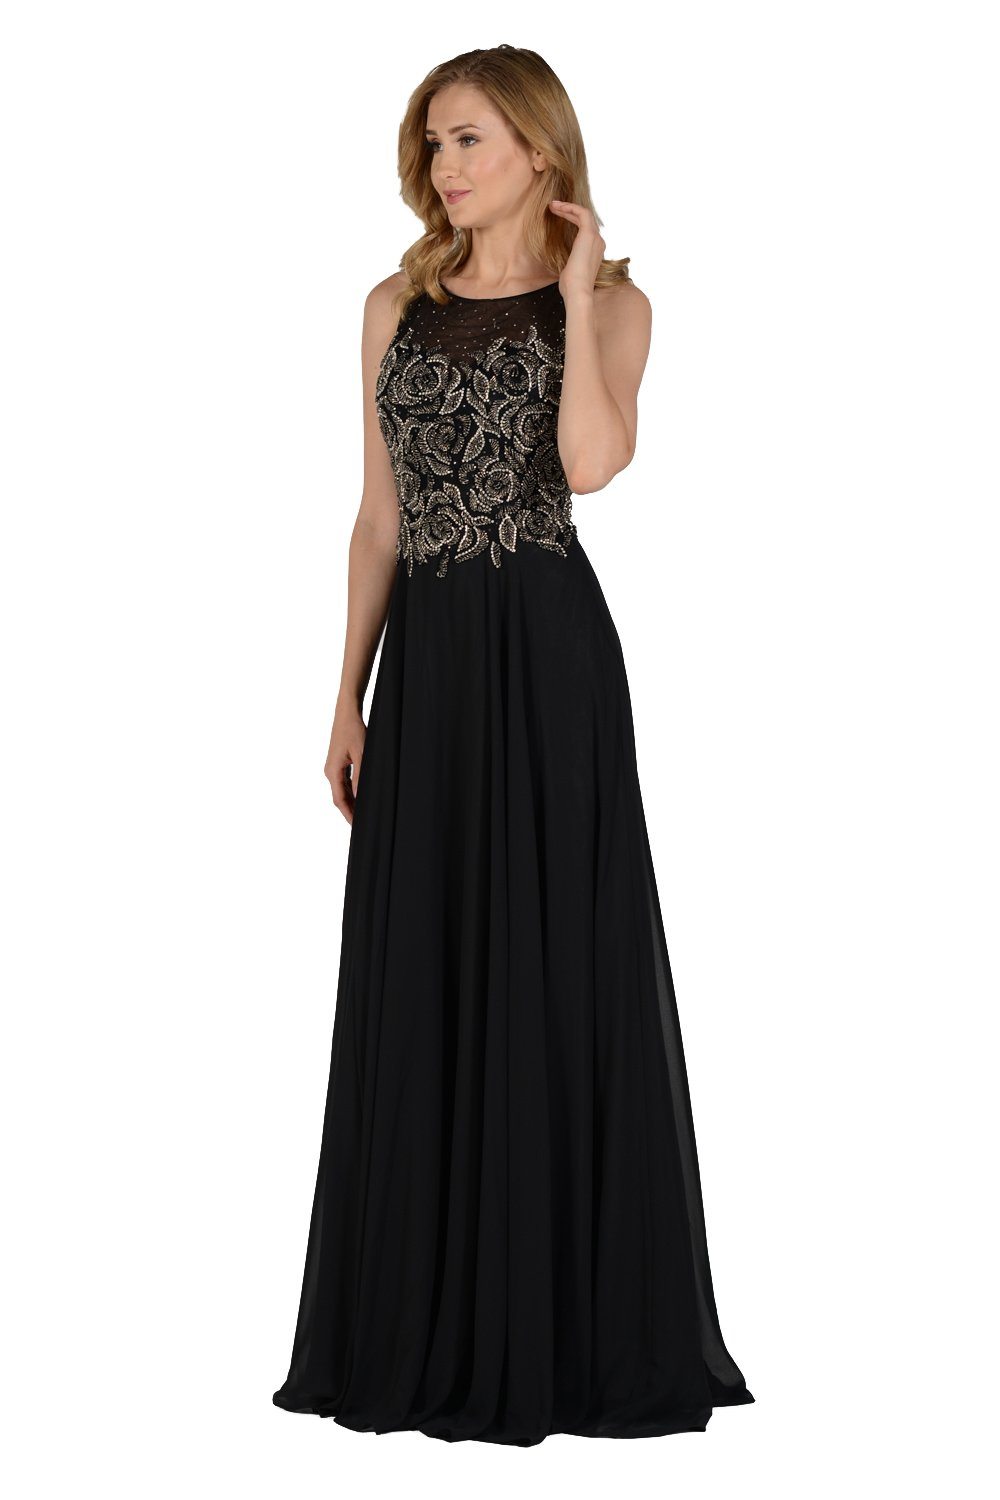 Long Black Dress with Beaded Illusion Bodice by Poly USA – ABC Fashion